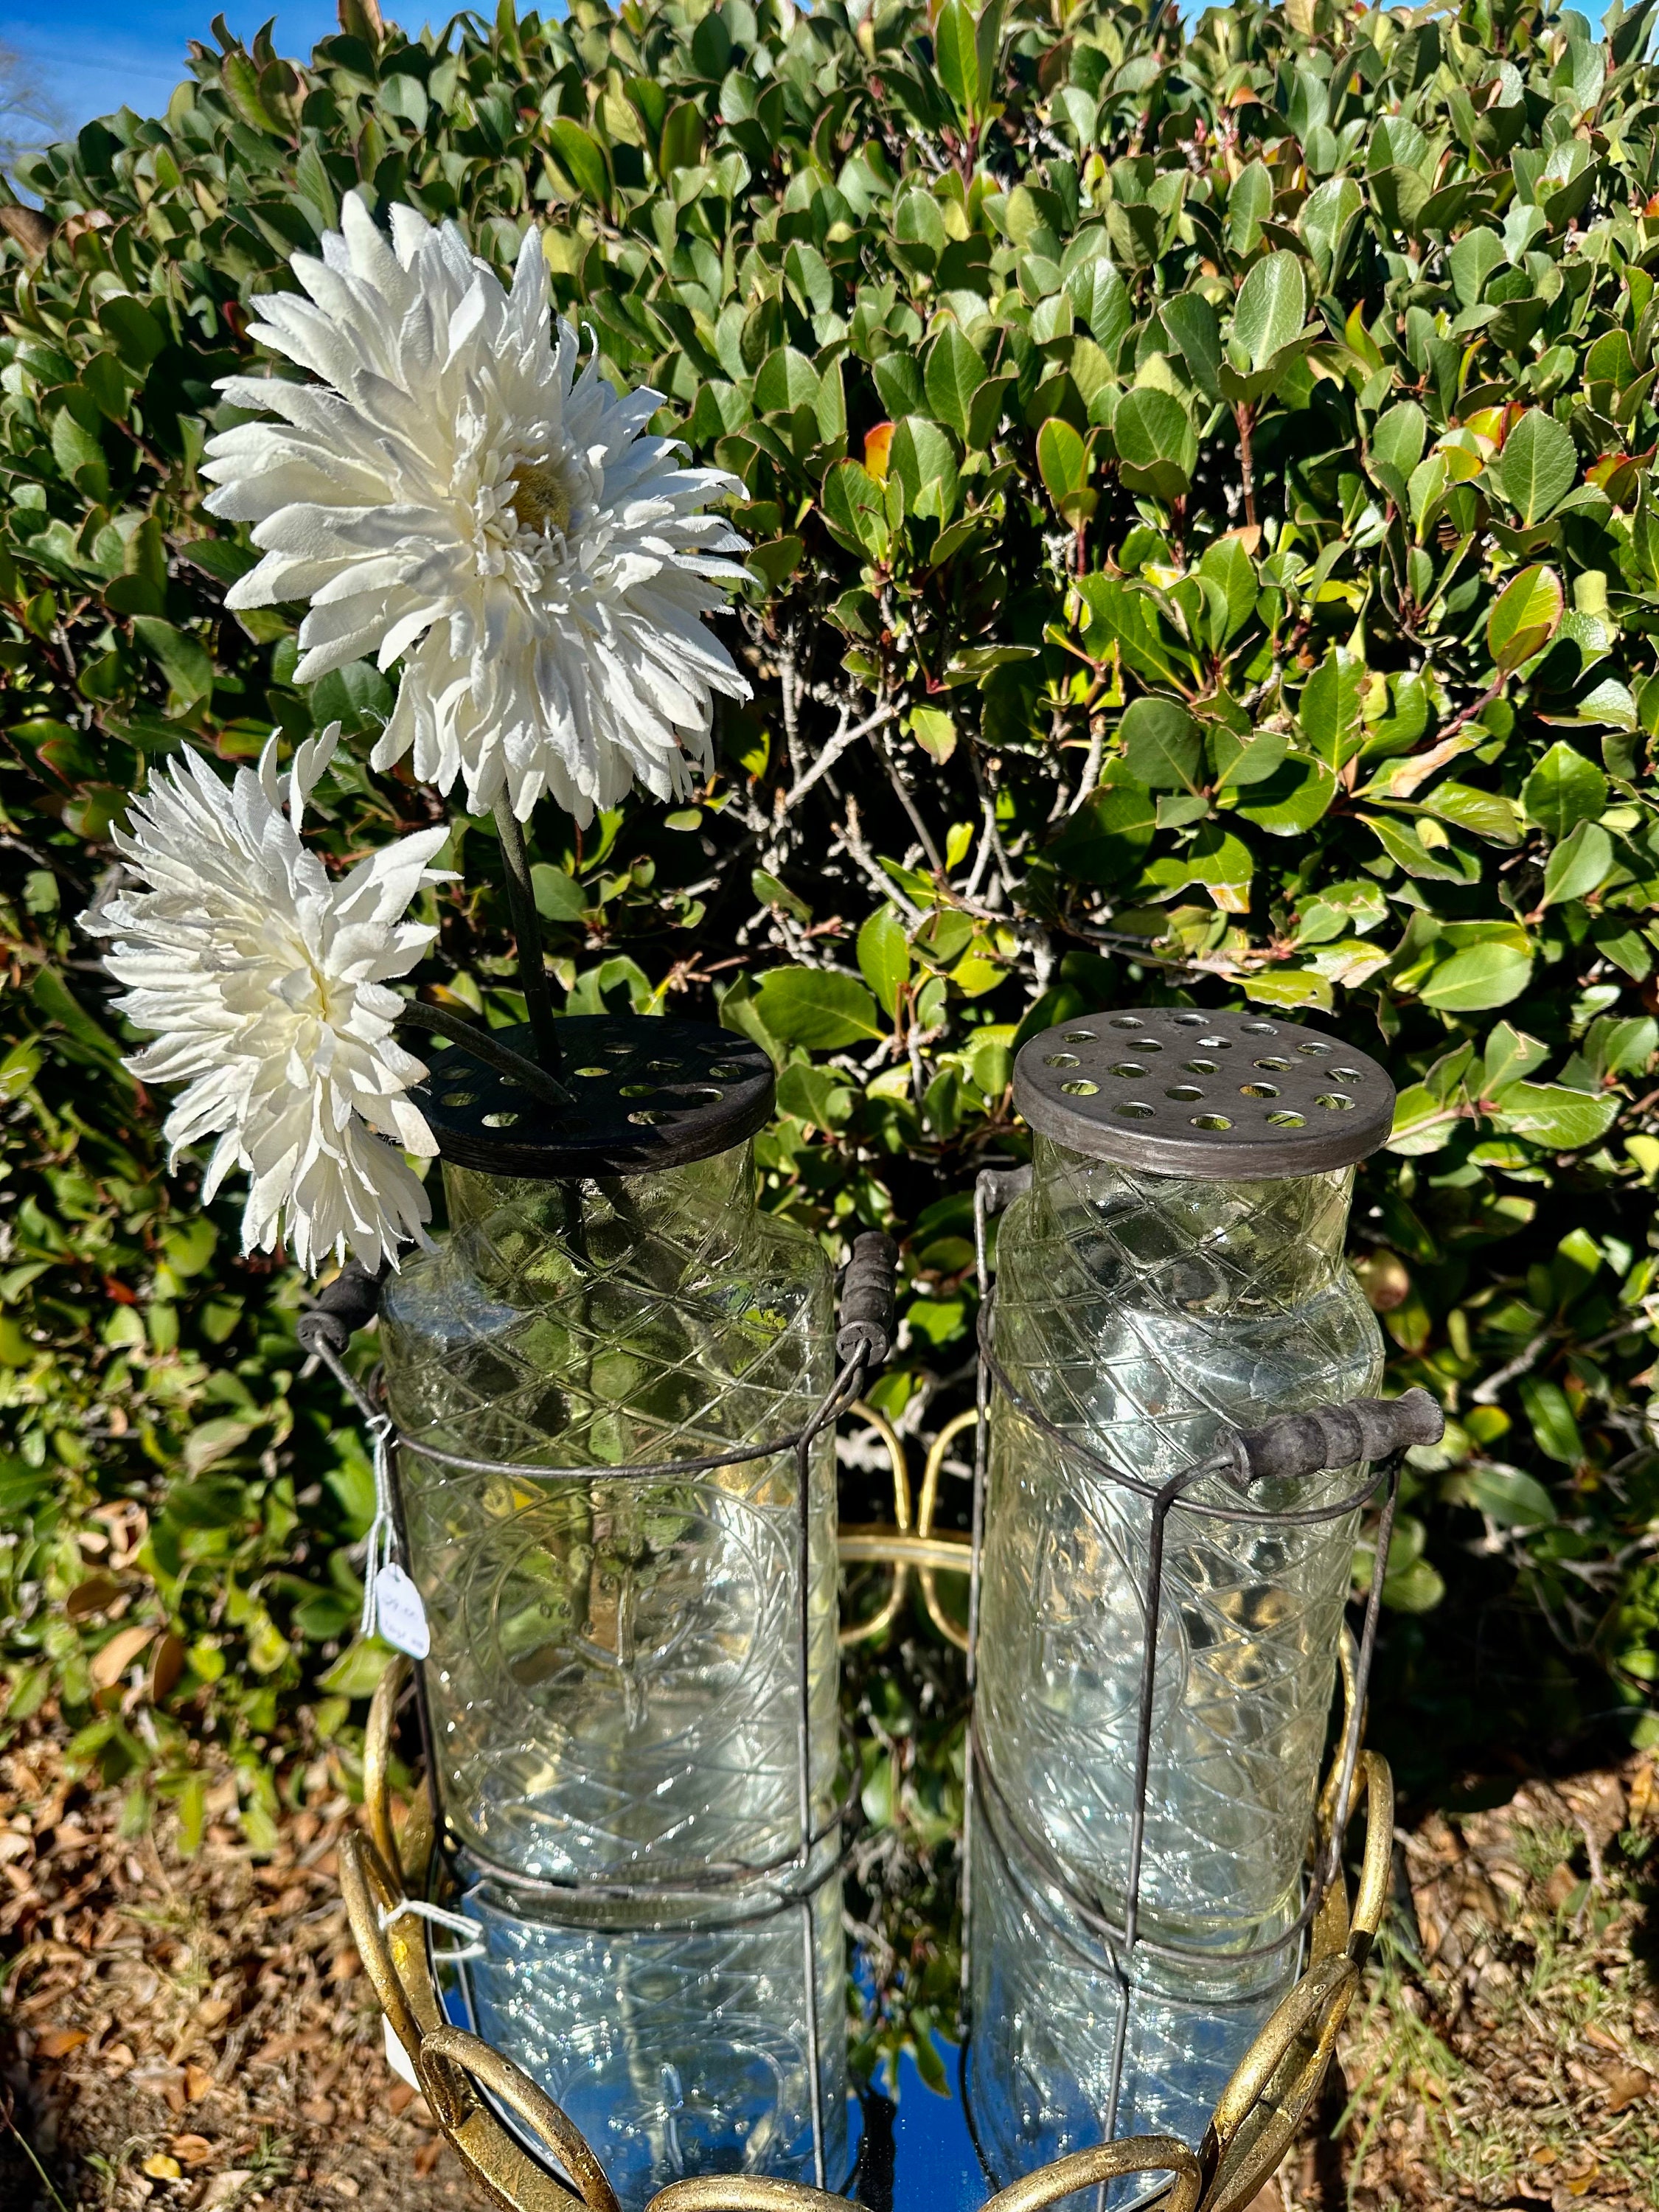 ONE CLEAR HOME MADE FRENCH FARMHOUSE MESH FLOWER FROG GLASS MASON JAR VASE